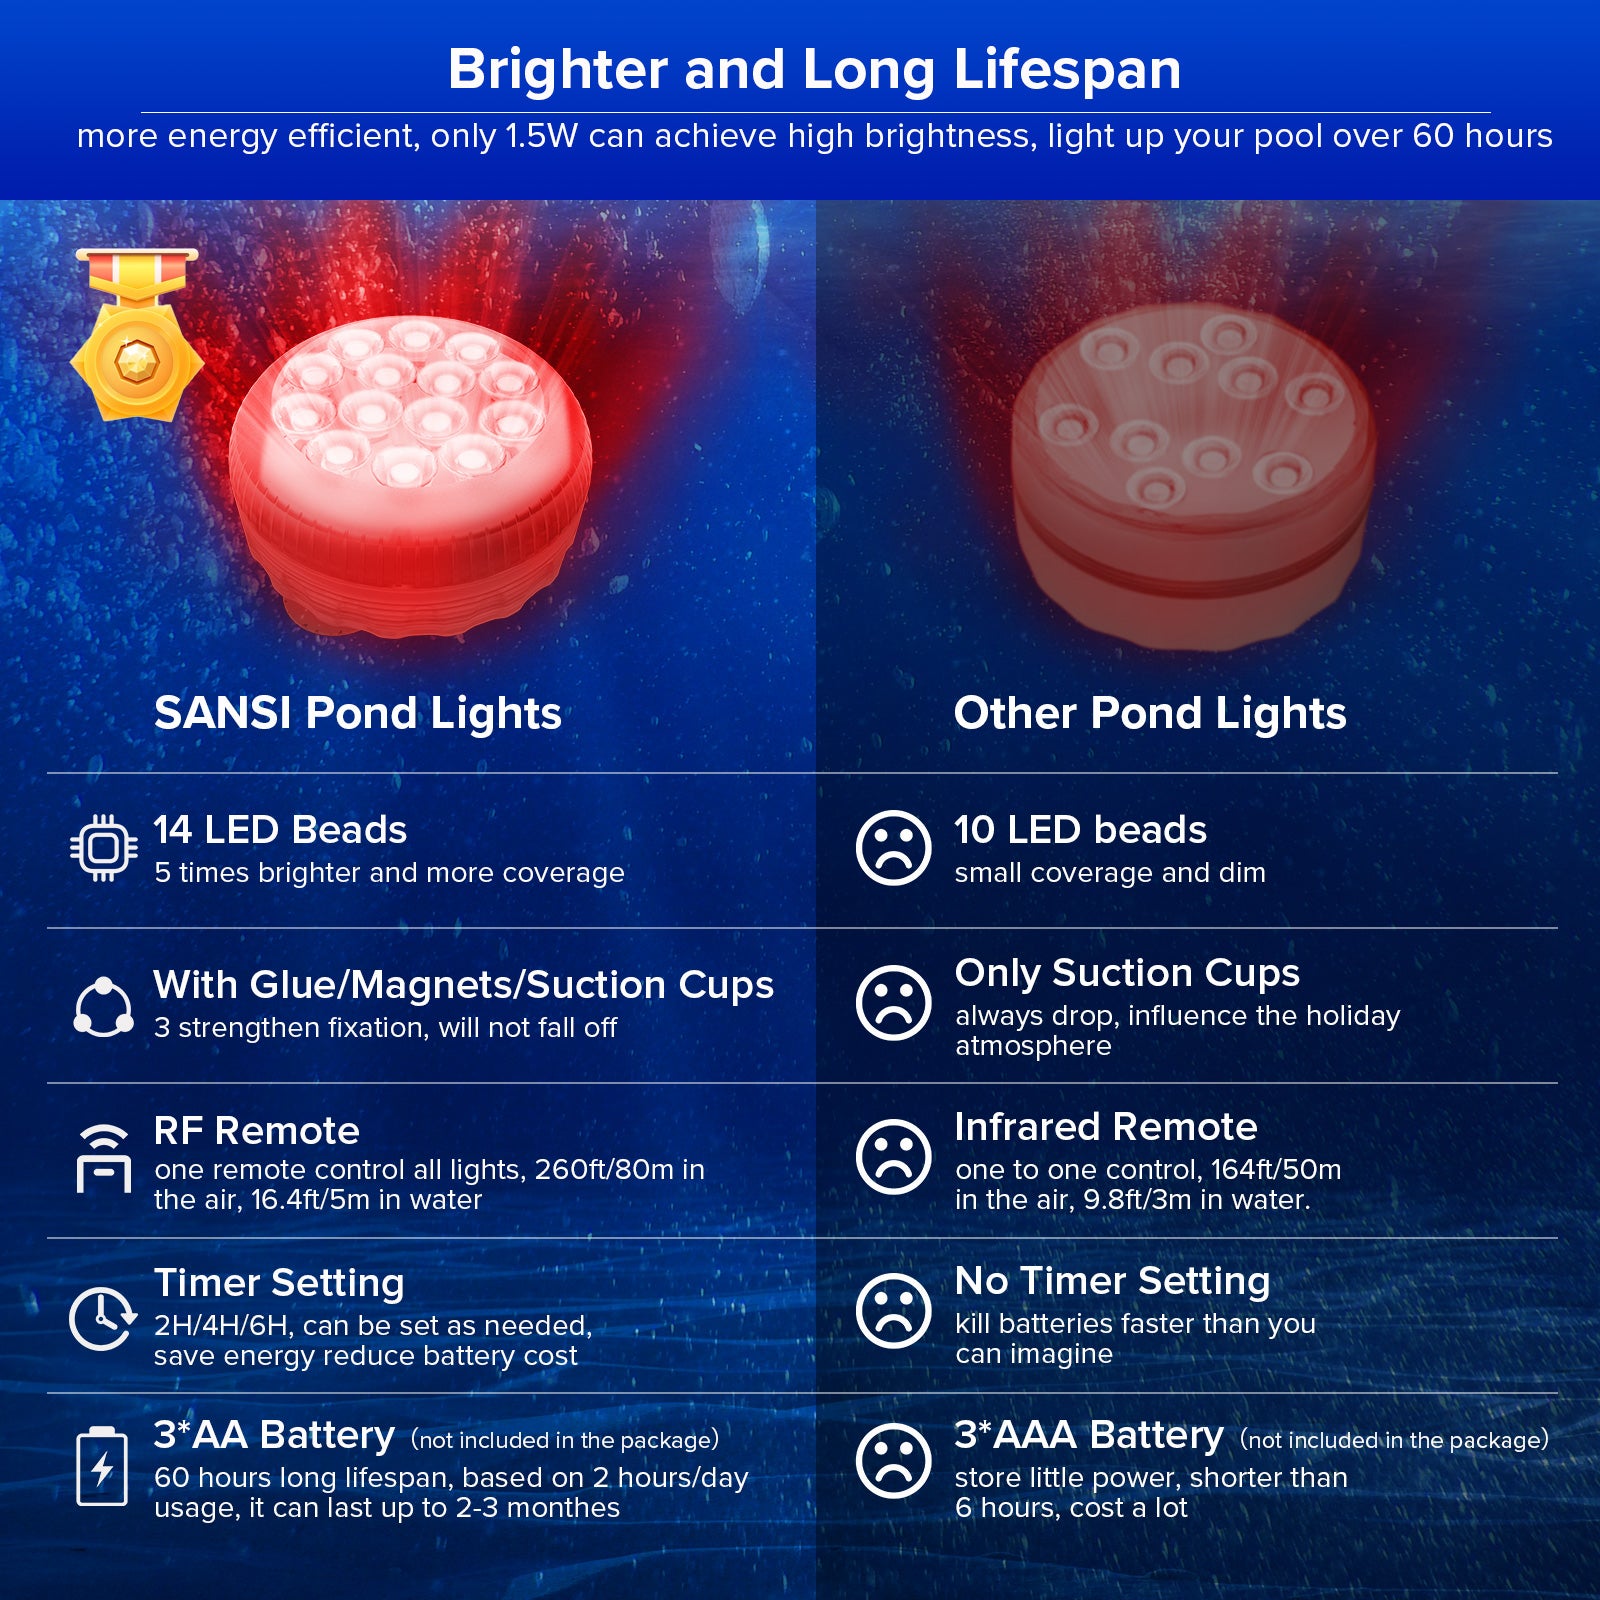 Upgraded RGB LED Submersible Pool Light is brighter and has long lifespan，provides more energy efficient, only 1.5W can achieve high brightness, light up your pool over 60 hours.